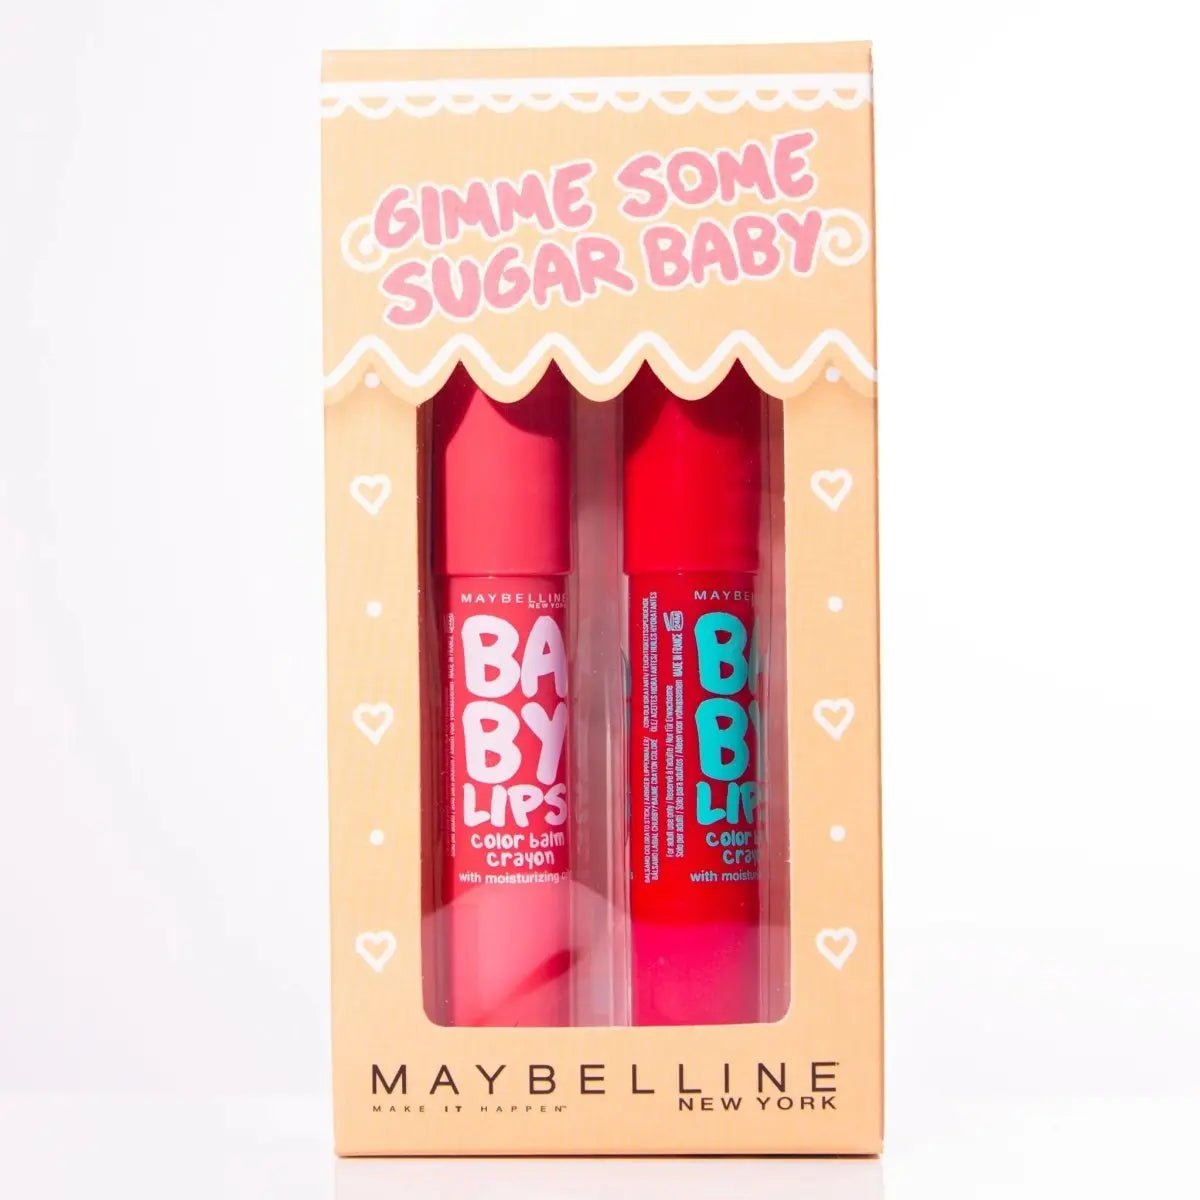 Image of Maybelline Gimme Some Sugar Baby Lips Gift Set